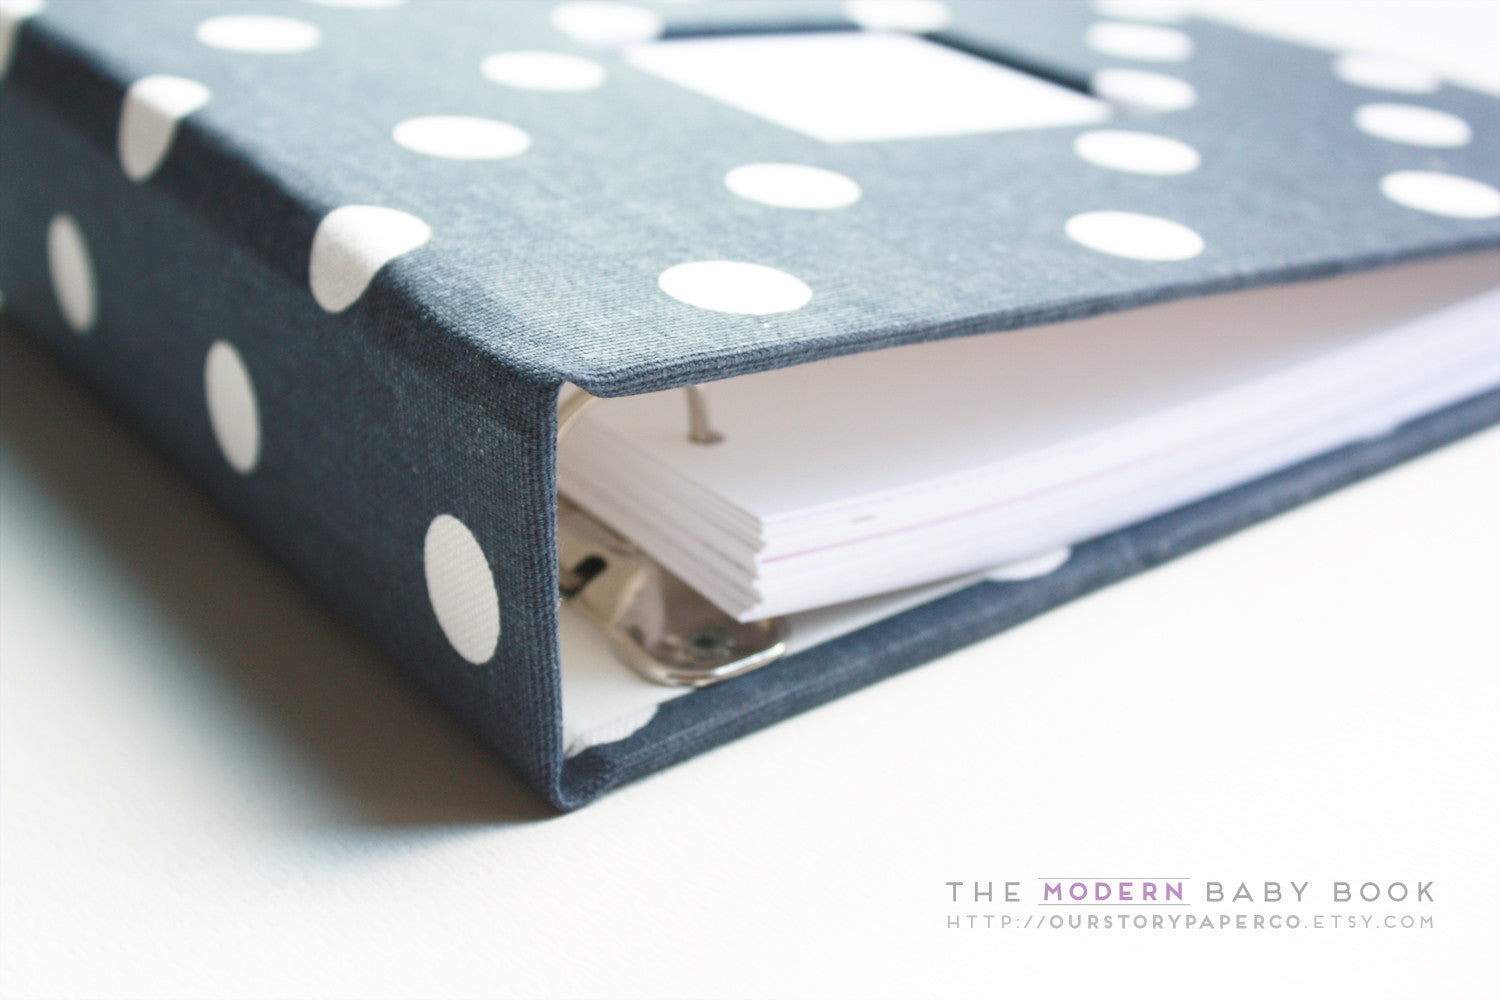 Navy Polka Dot Modern Baby Book - Our Story Paper Co.